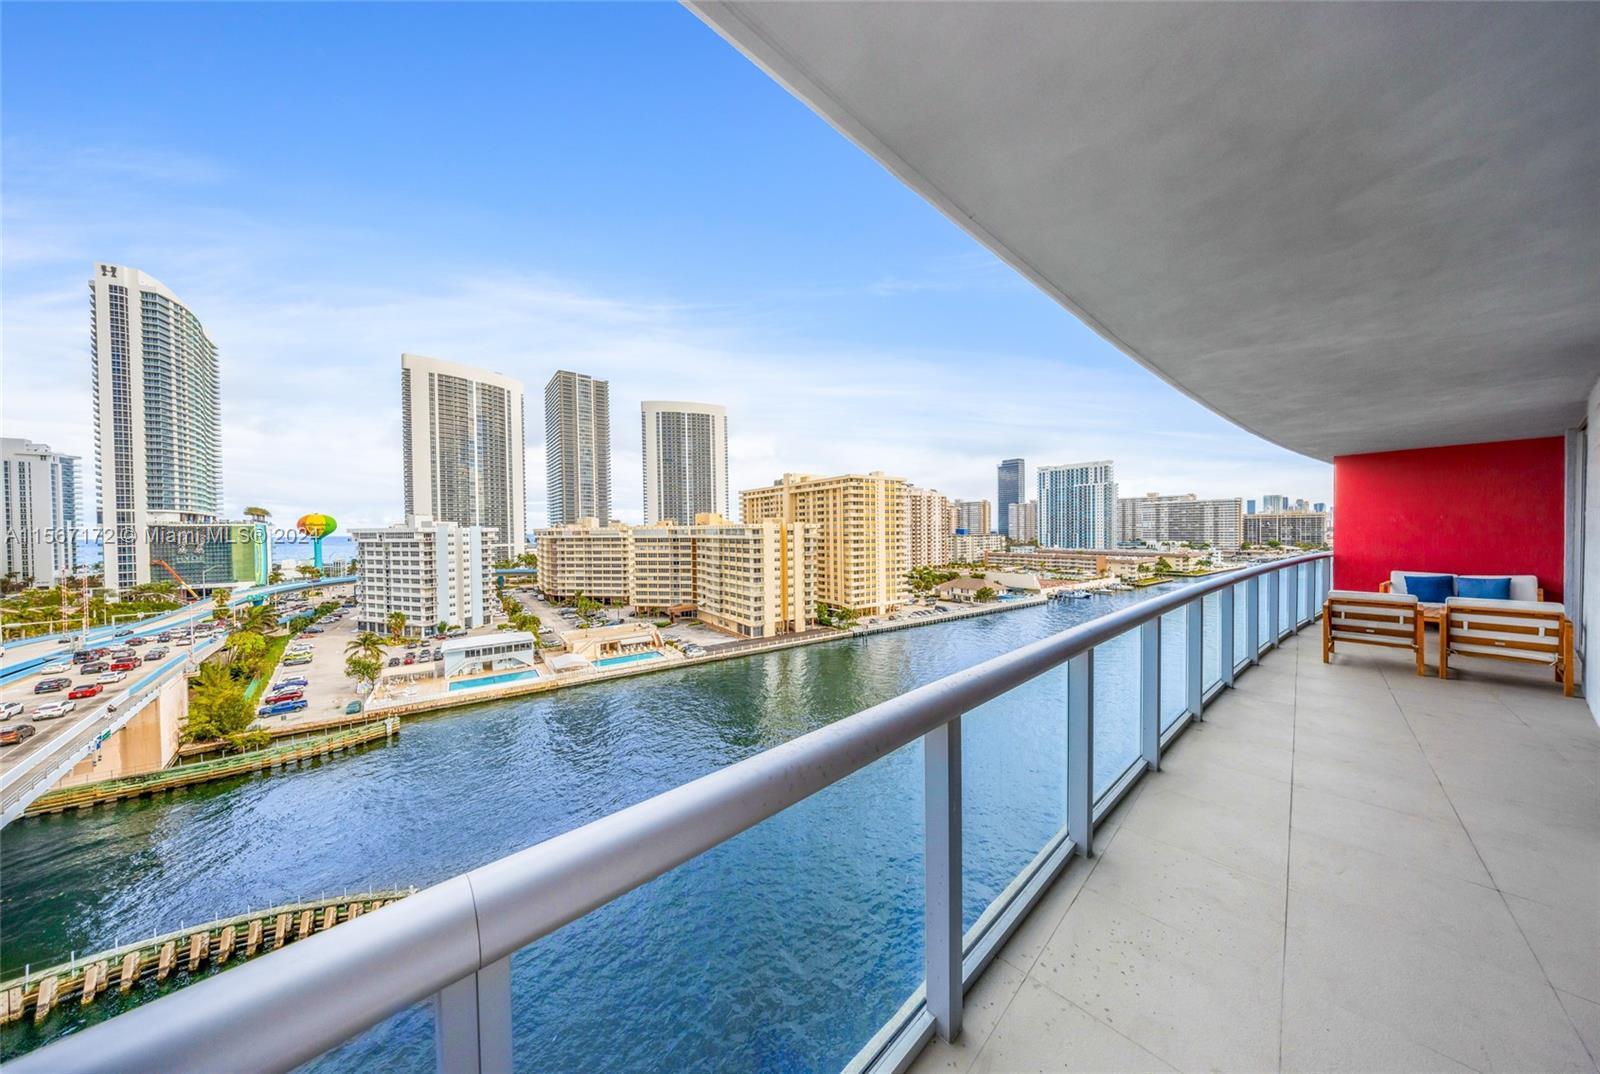 Luxury corner unit with stunning ocean, intracoastal, and city views. Premium Italian cabinetry, mod